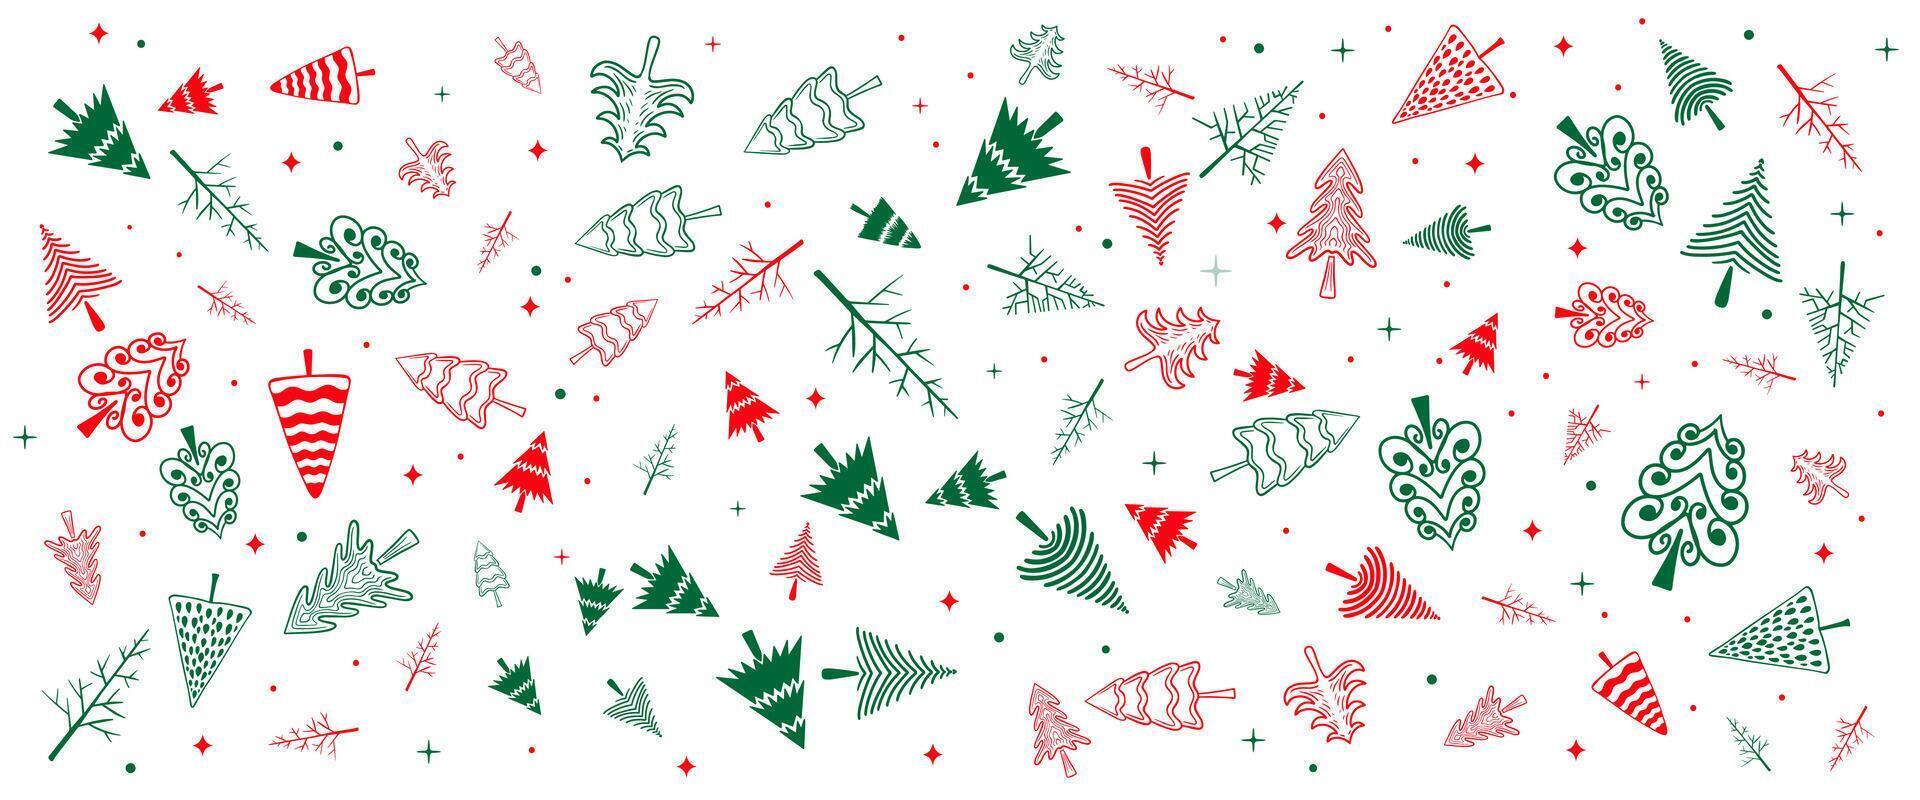 merry christmas trees decorative background vector